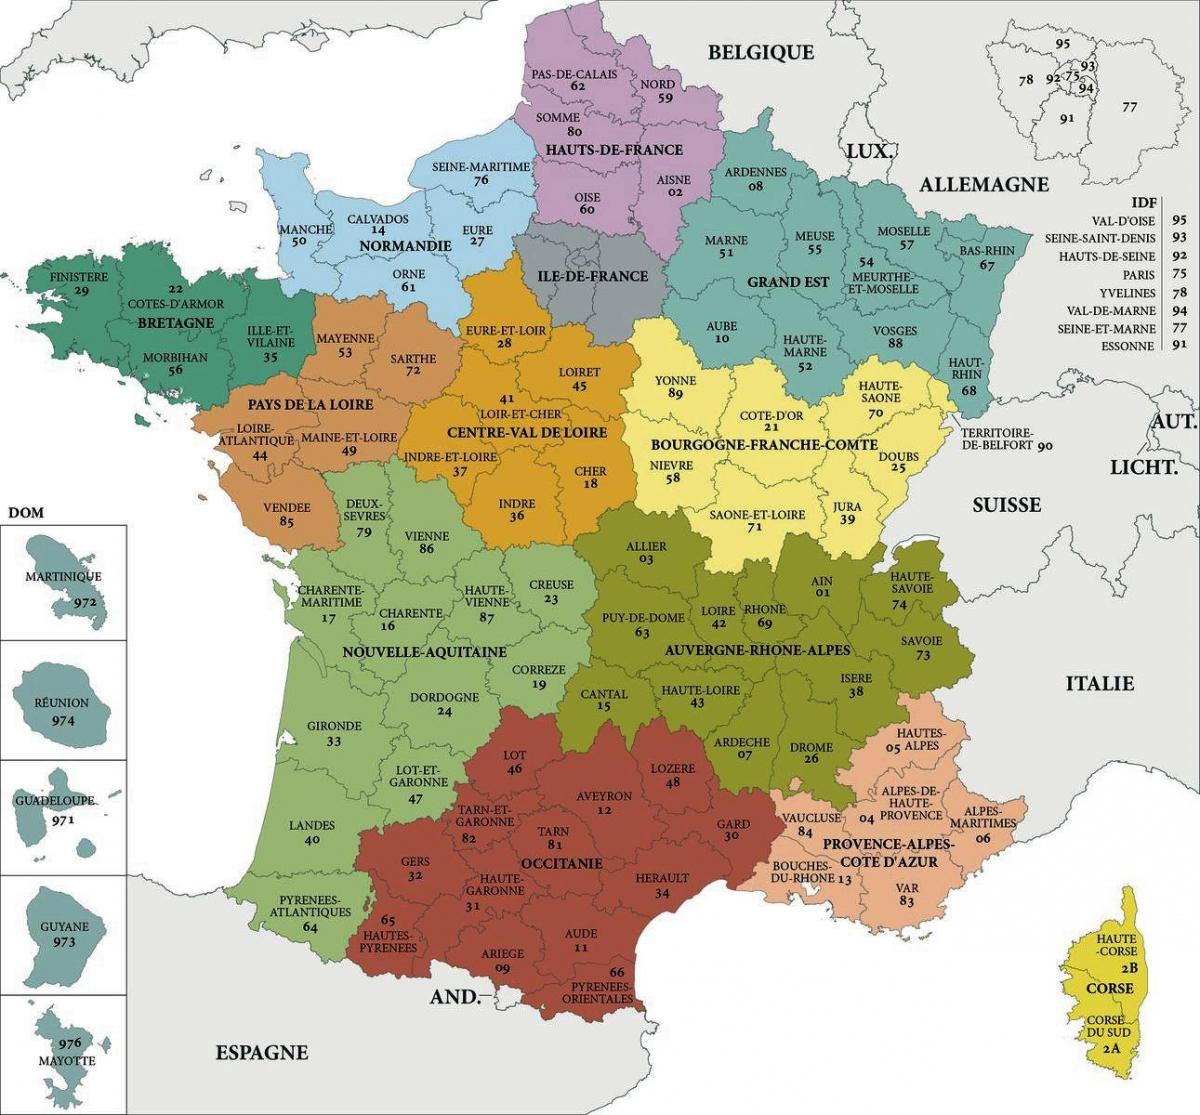 Departement France map - Map of France department (Western Europe - Europe)